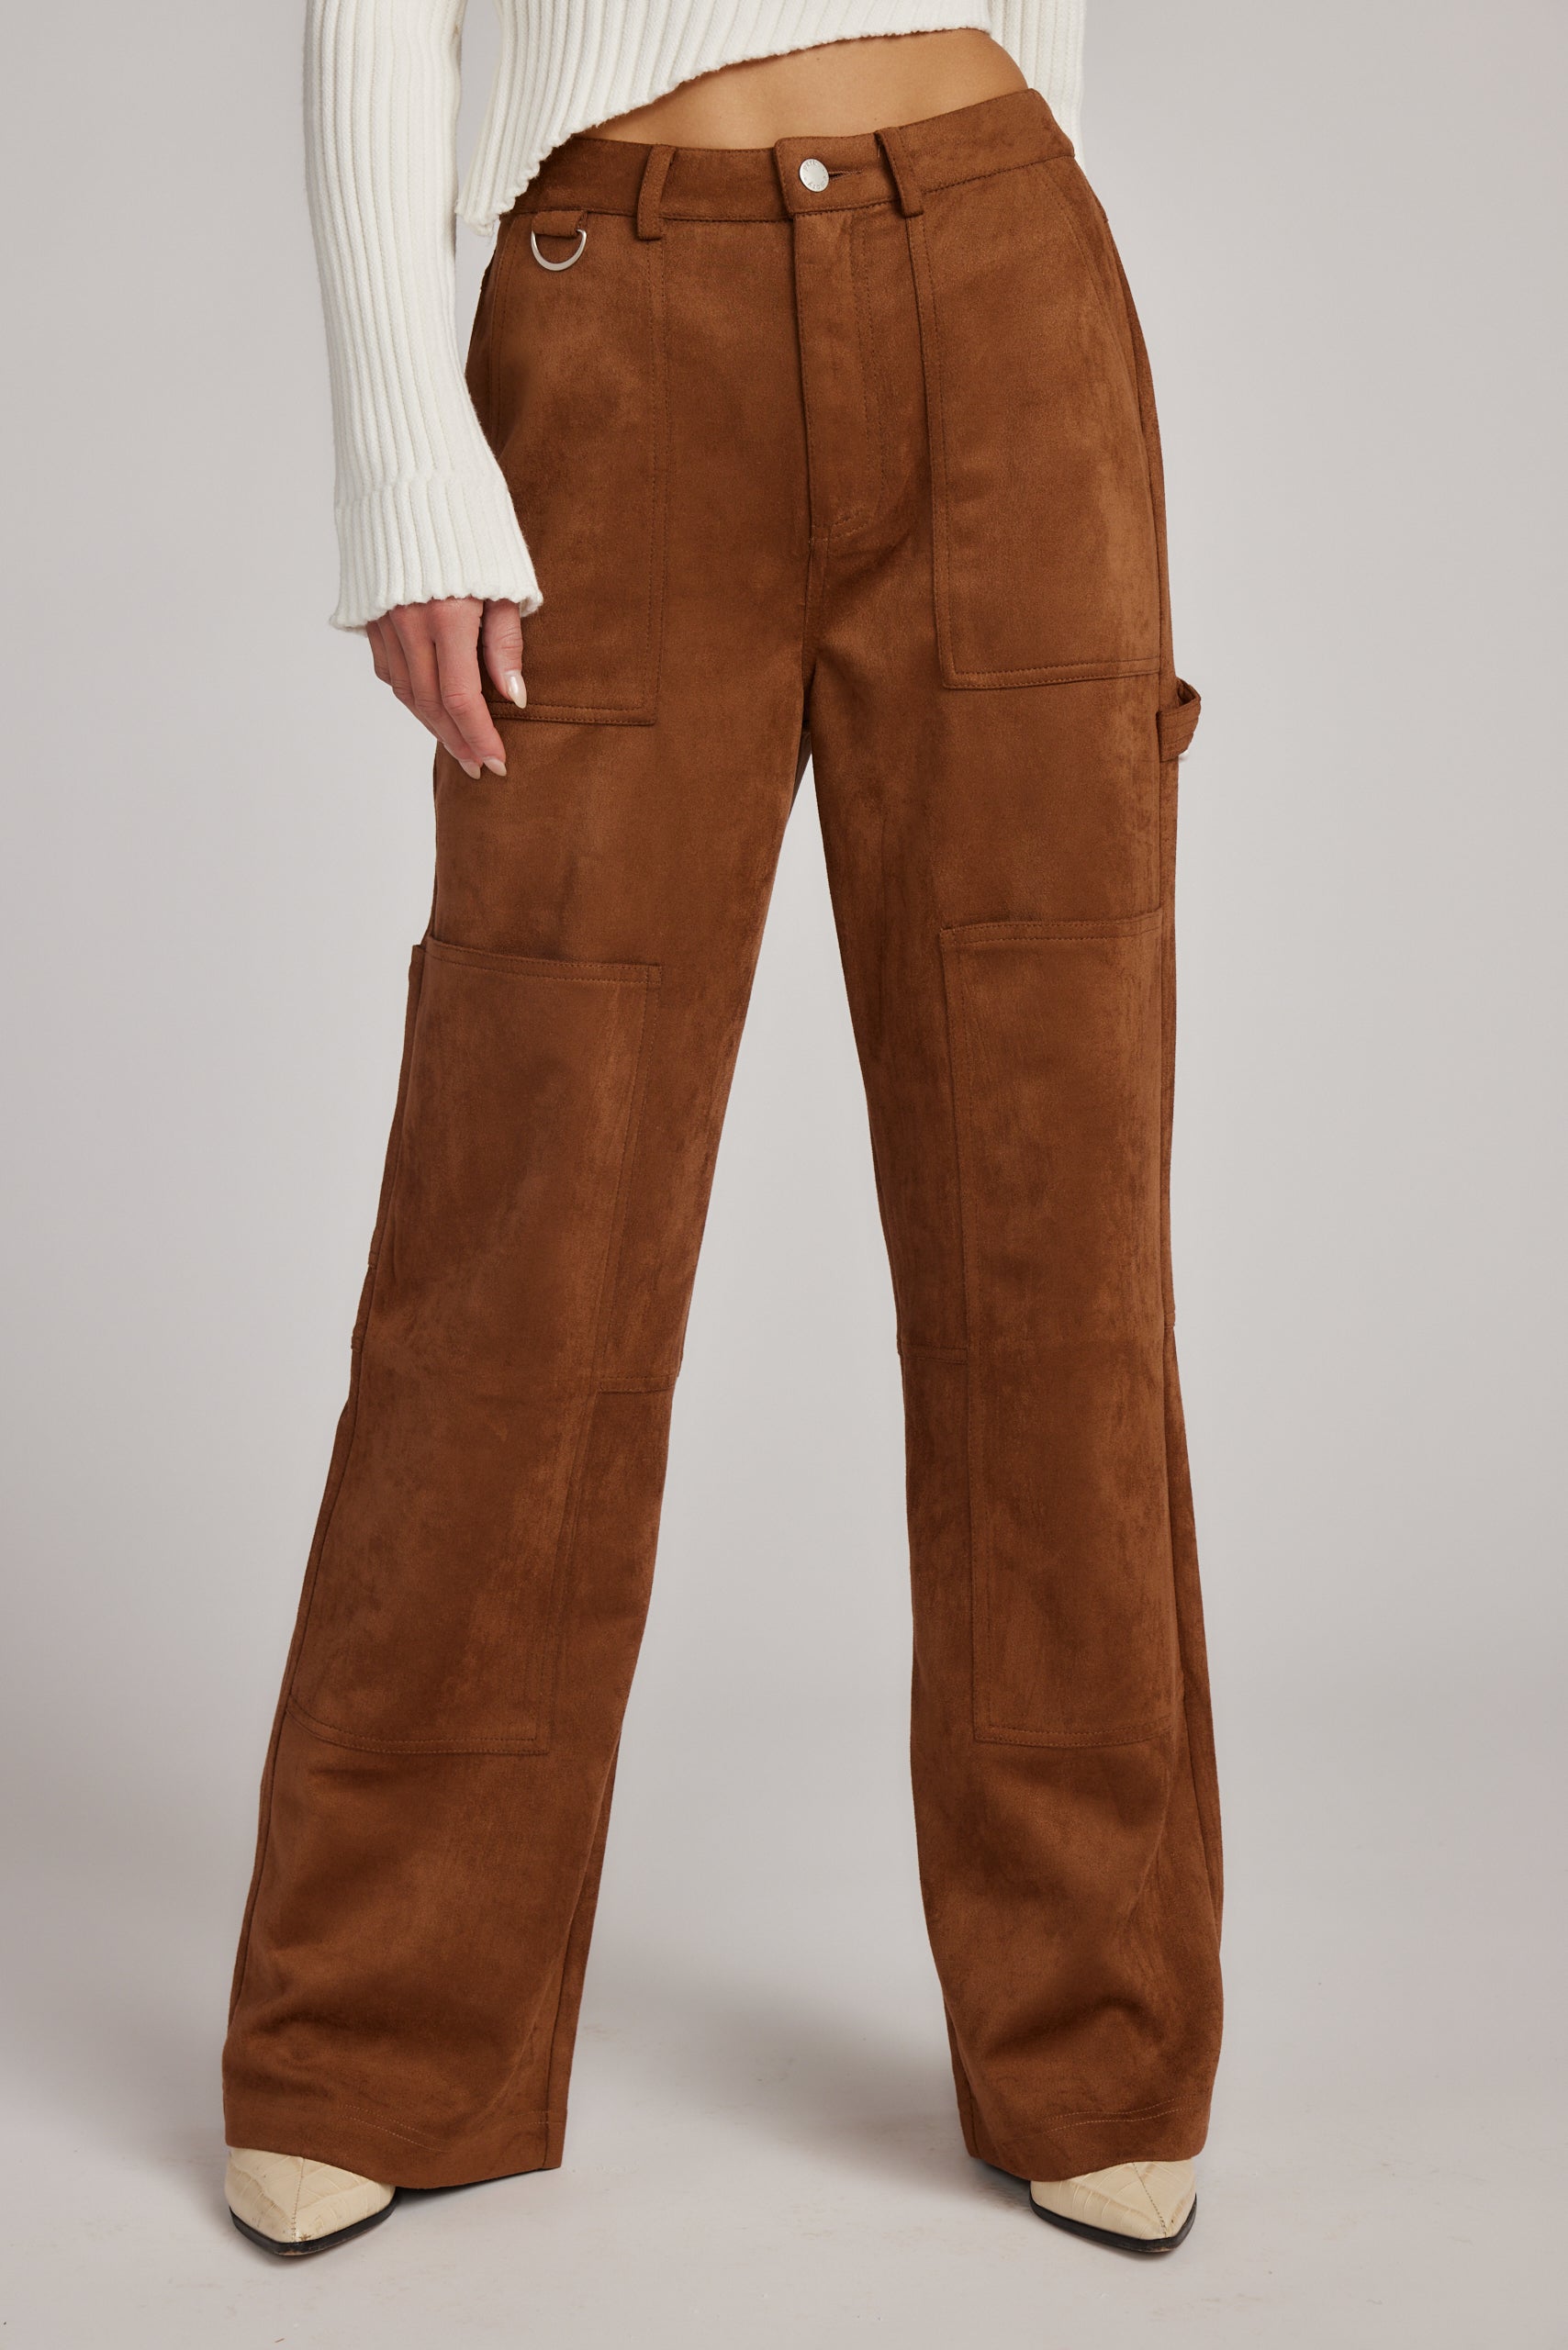 600 Brown Suede Pants Royalty-Free Images, Stock Photos & Pictures